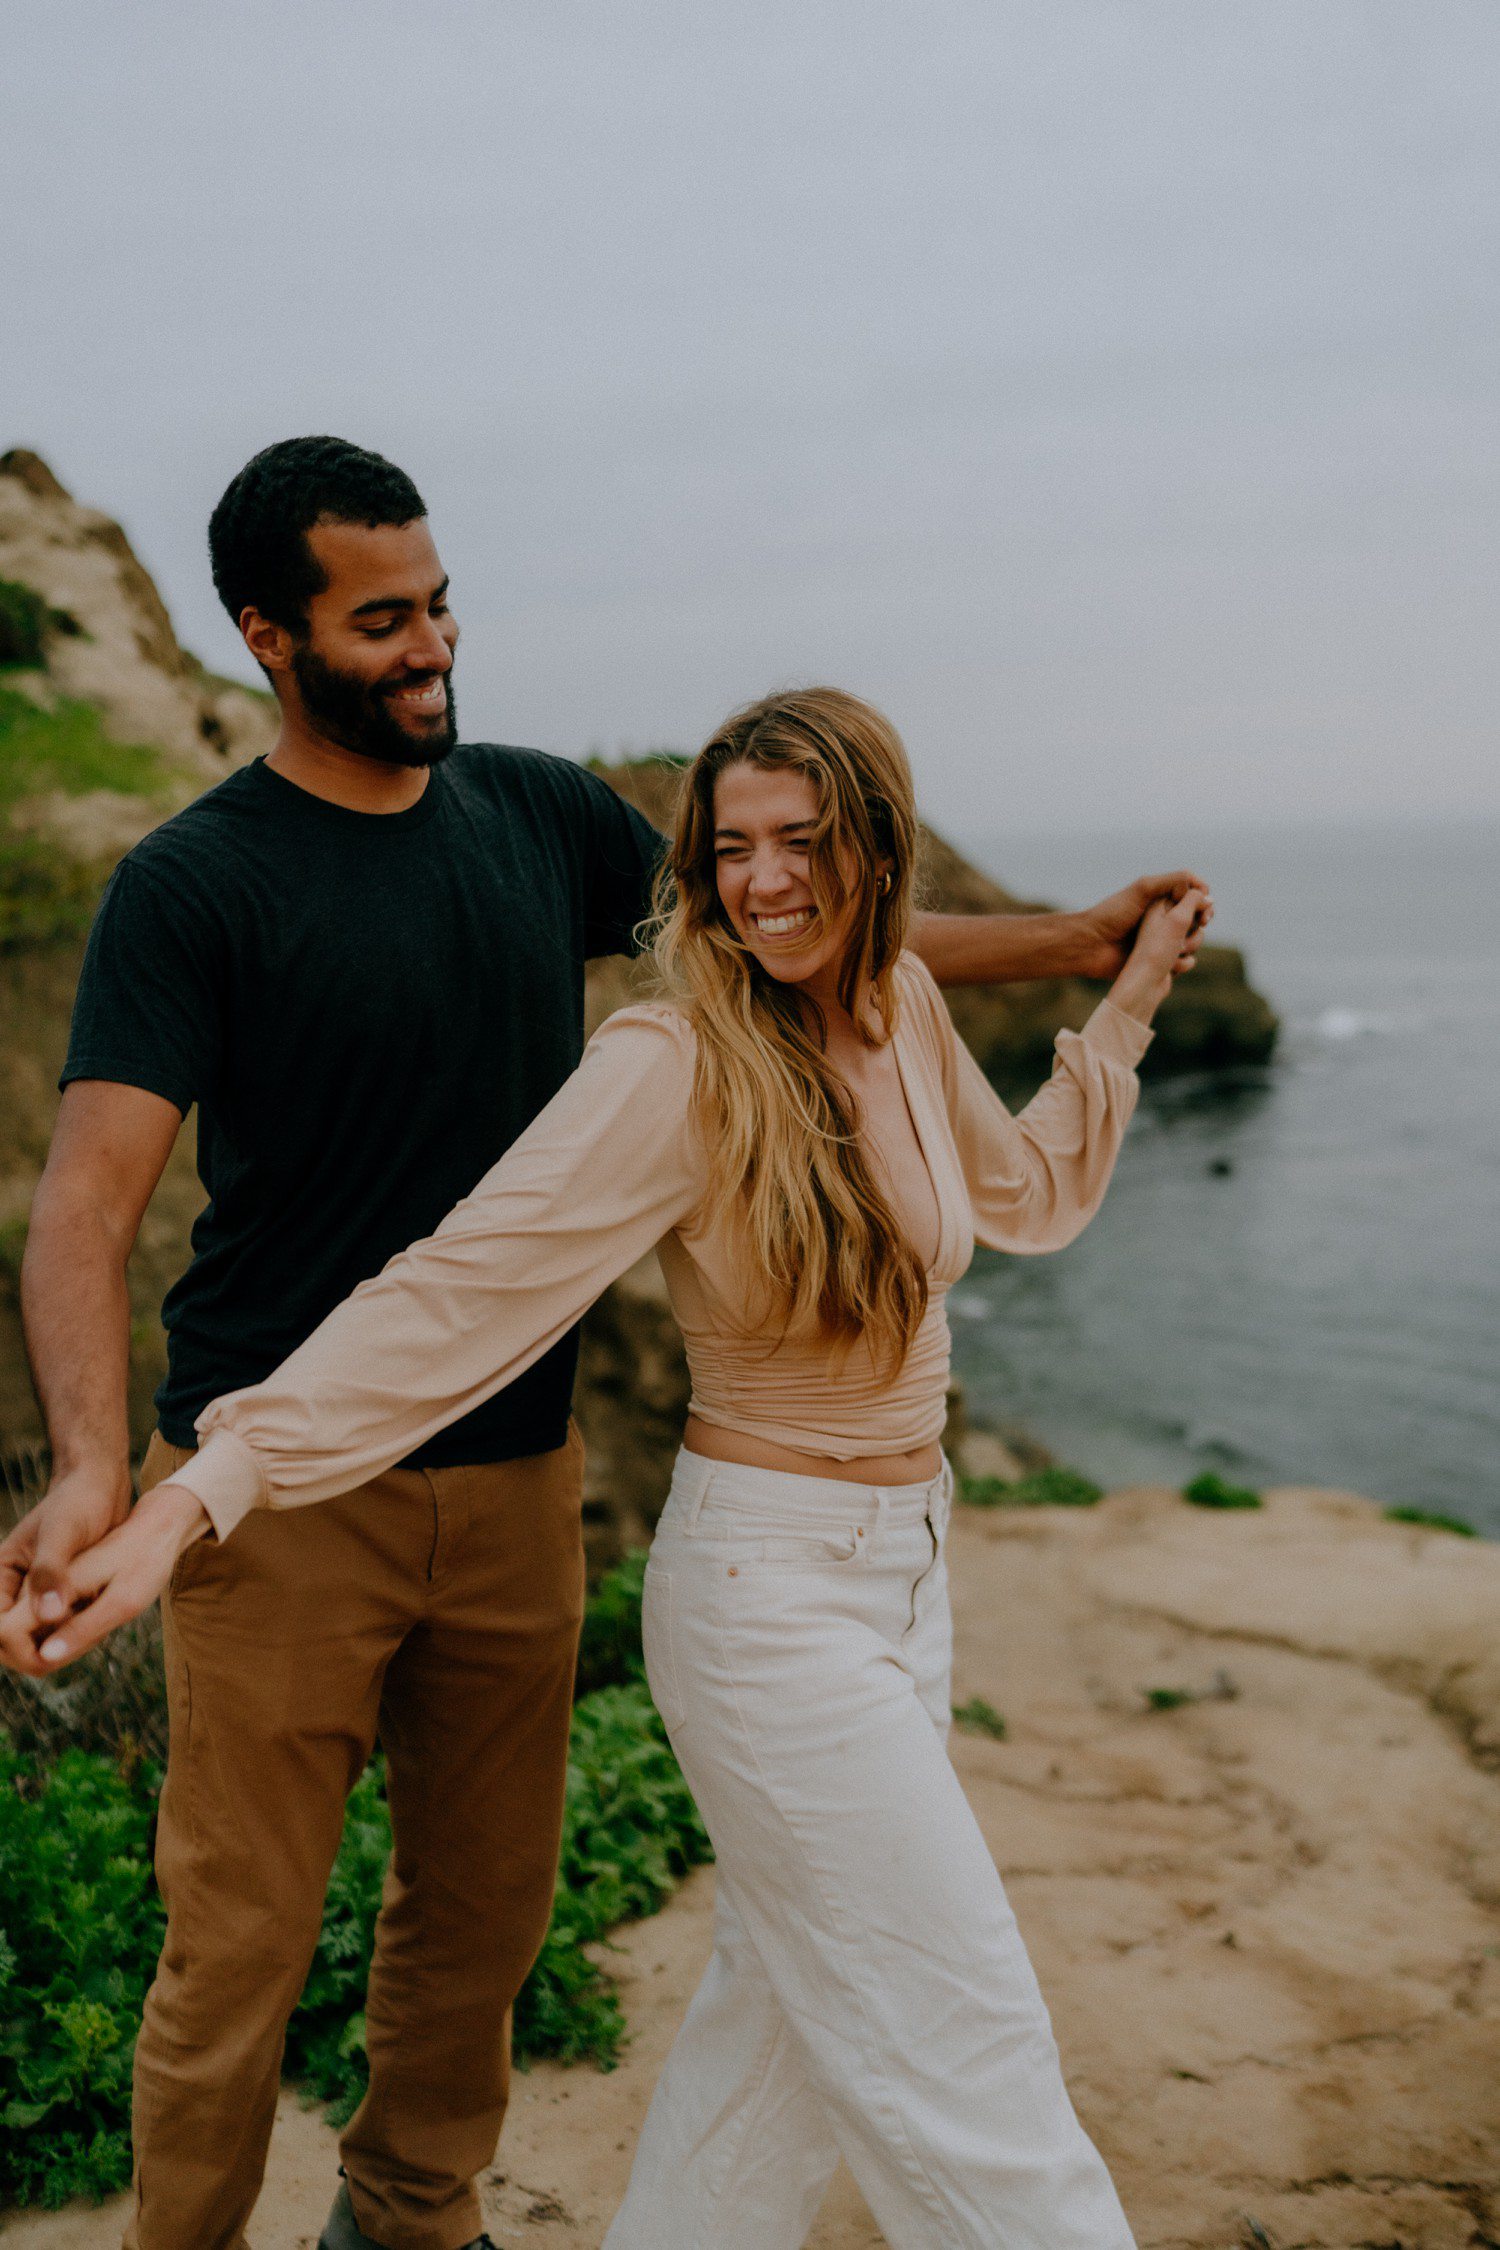 Couples photos at sunset cliffs in San Diego.